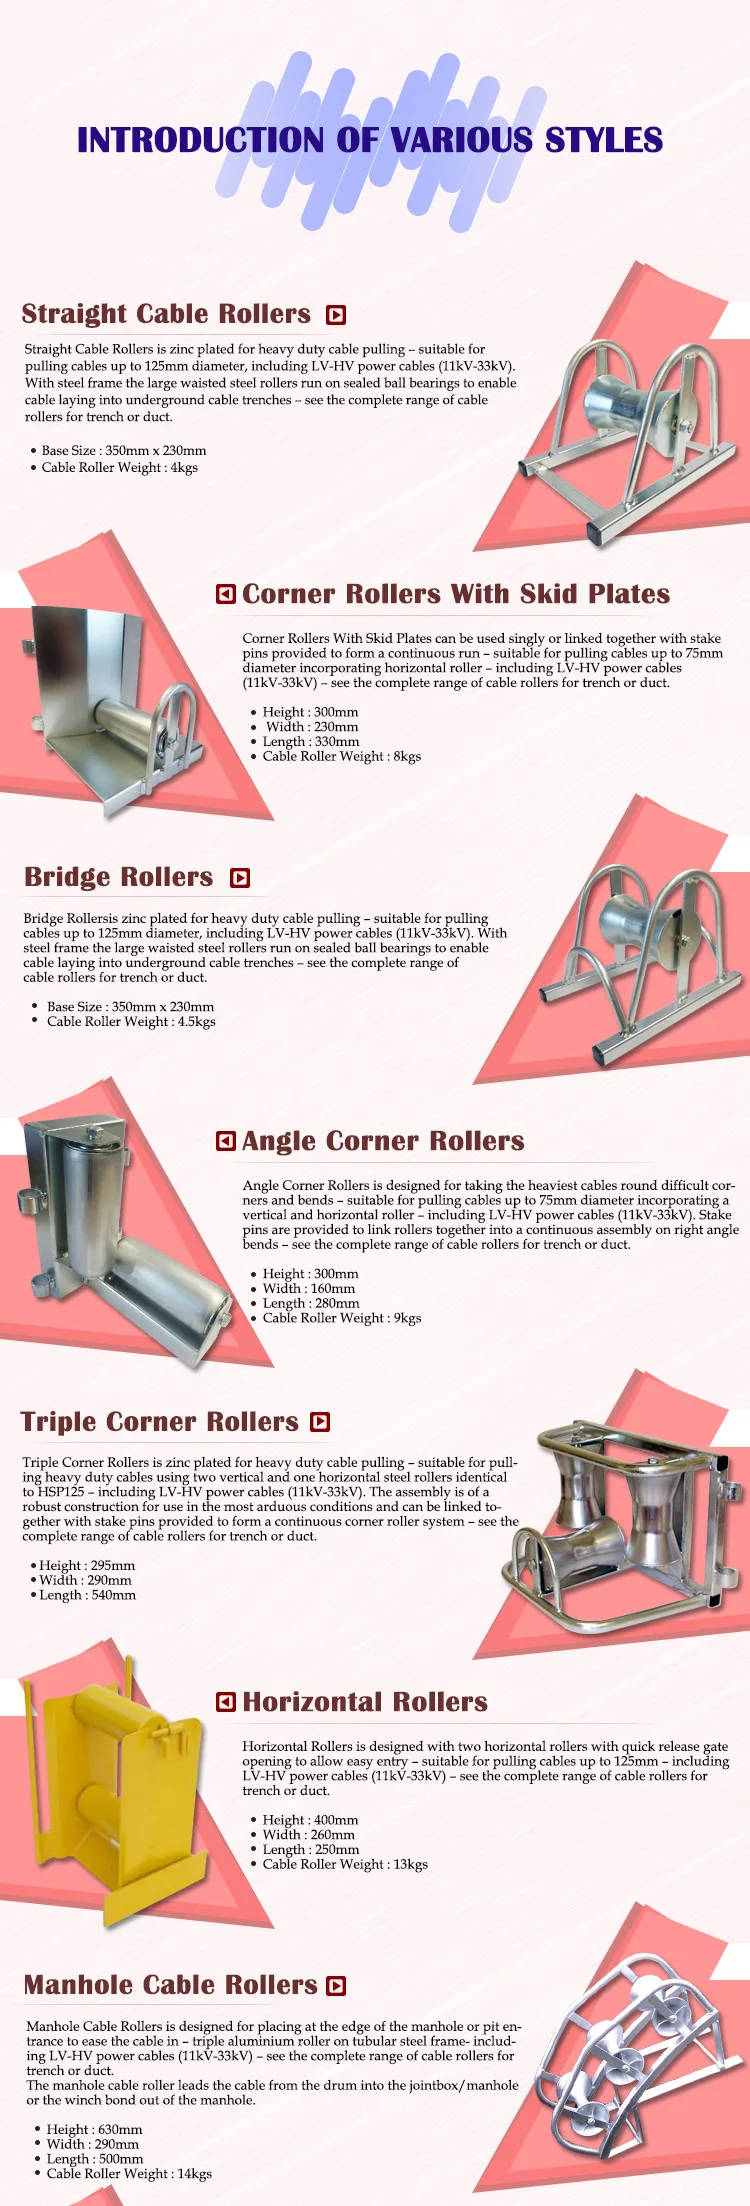 Cable Rollers Up To 125mm – Bridge Rollers For Cable Trench